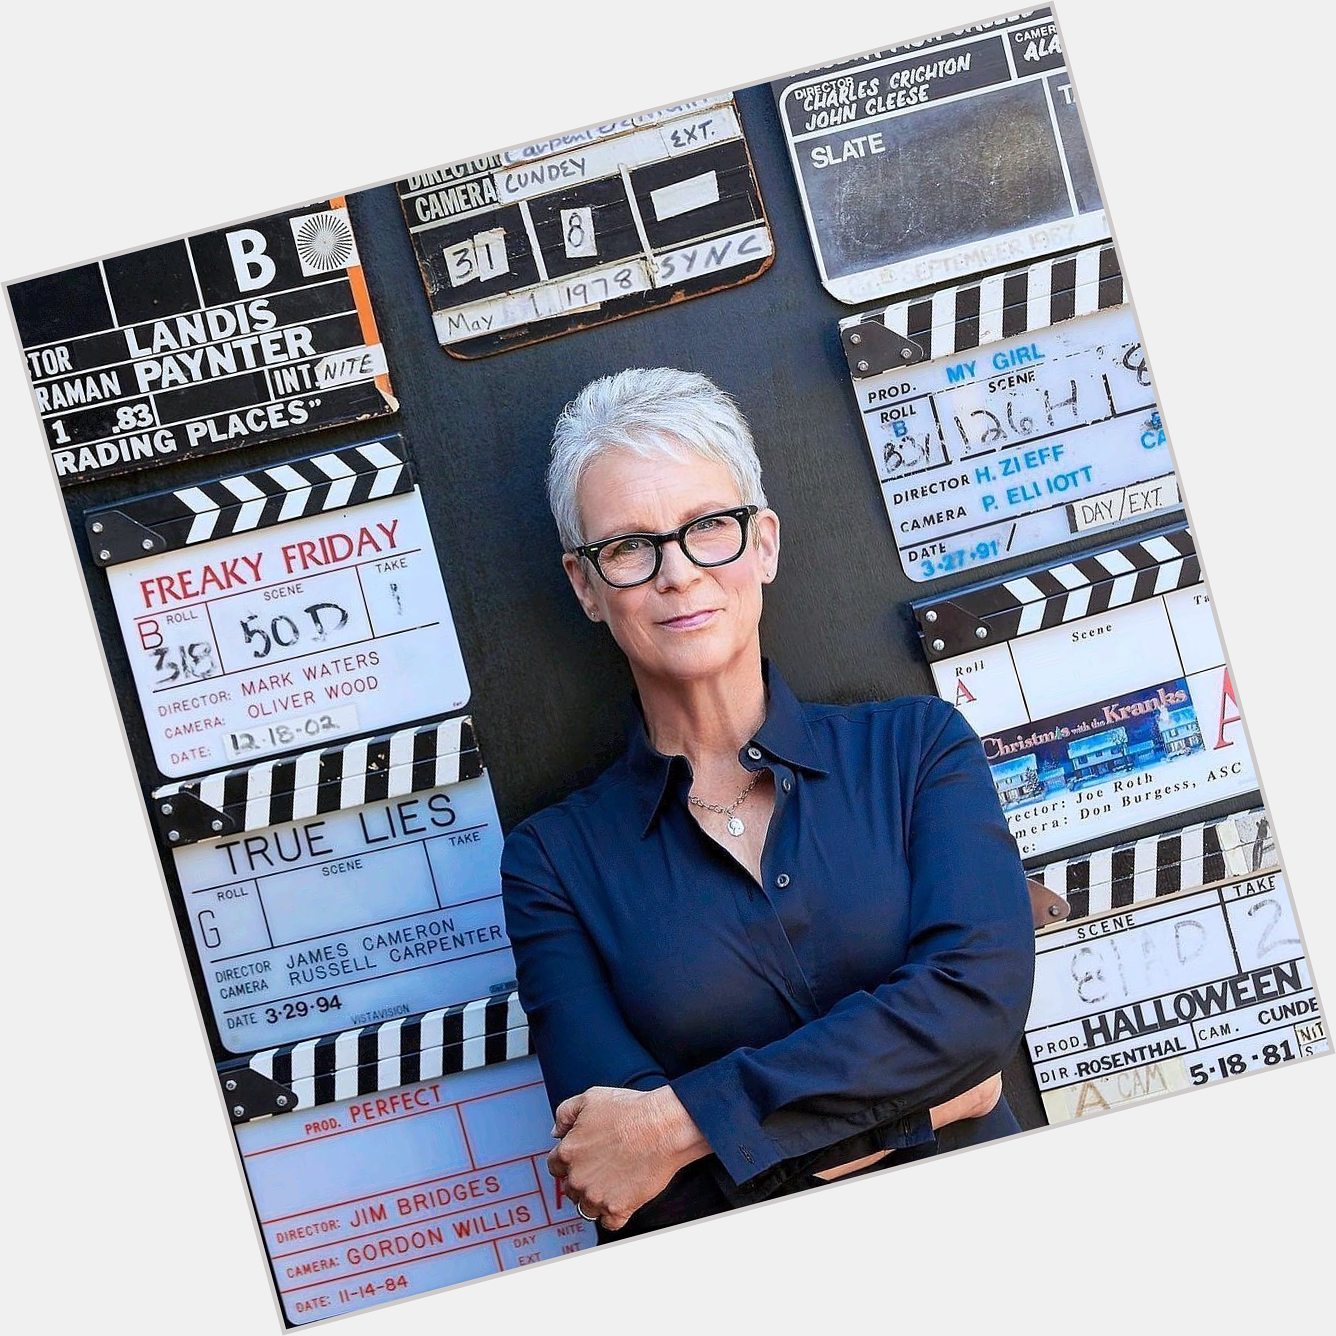 Happy Birthday to the Queen, Jamie Lee Curtis!

It really is amazing how many great films she has made. 